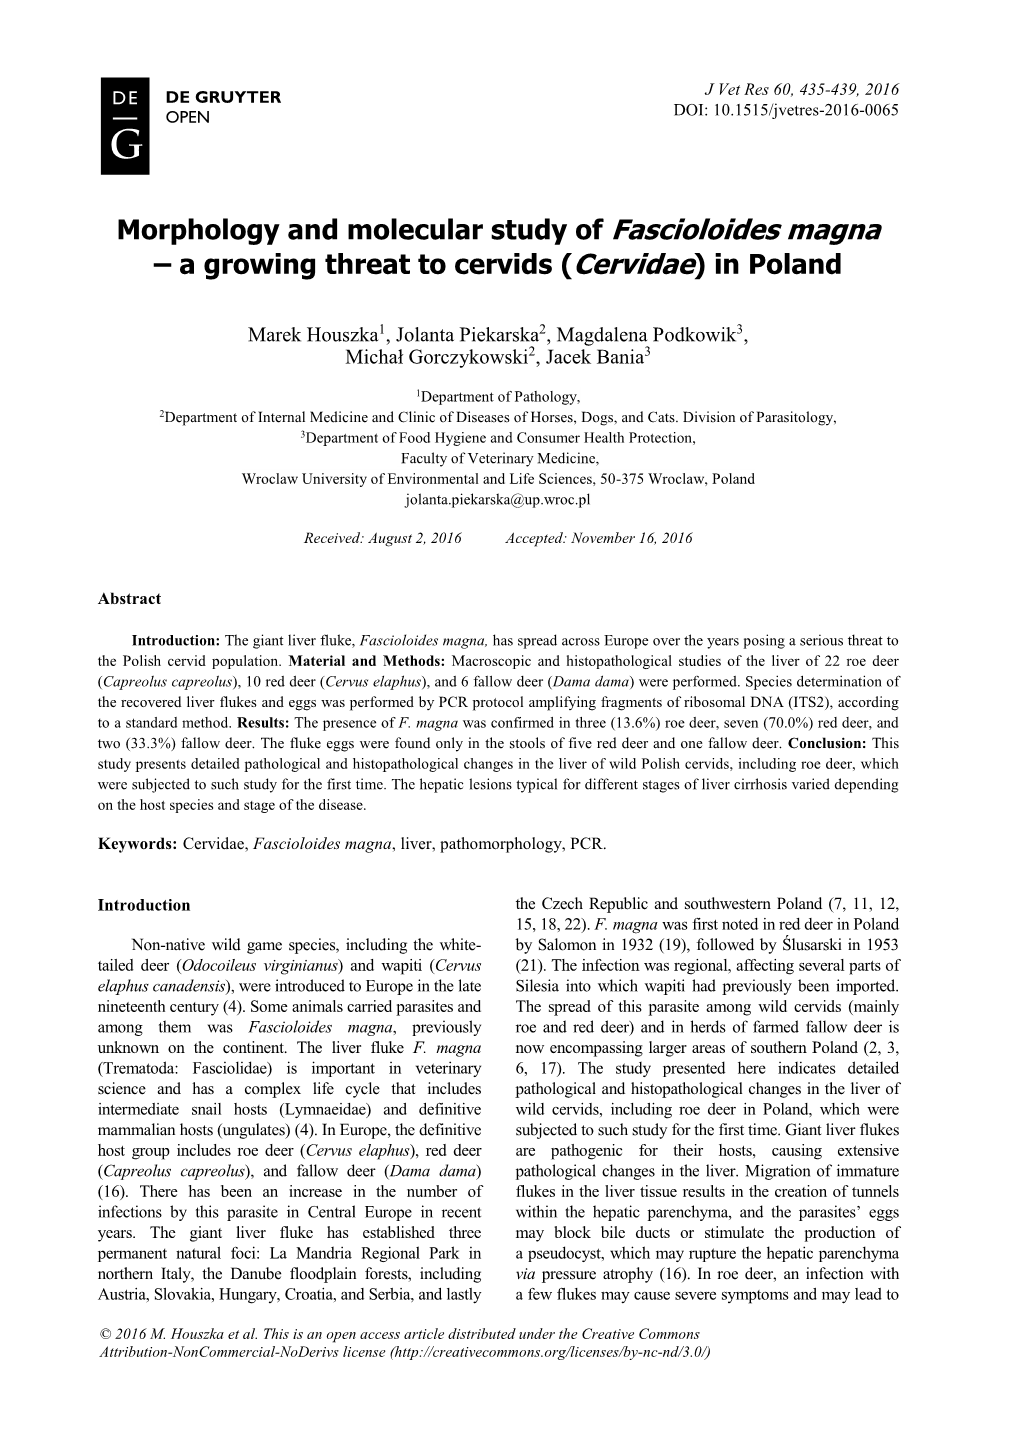 Morphology and Molecular Study of Fascioloides Magna – a Growing Threat to Cervids (Cervidae) in Poland